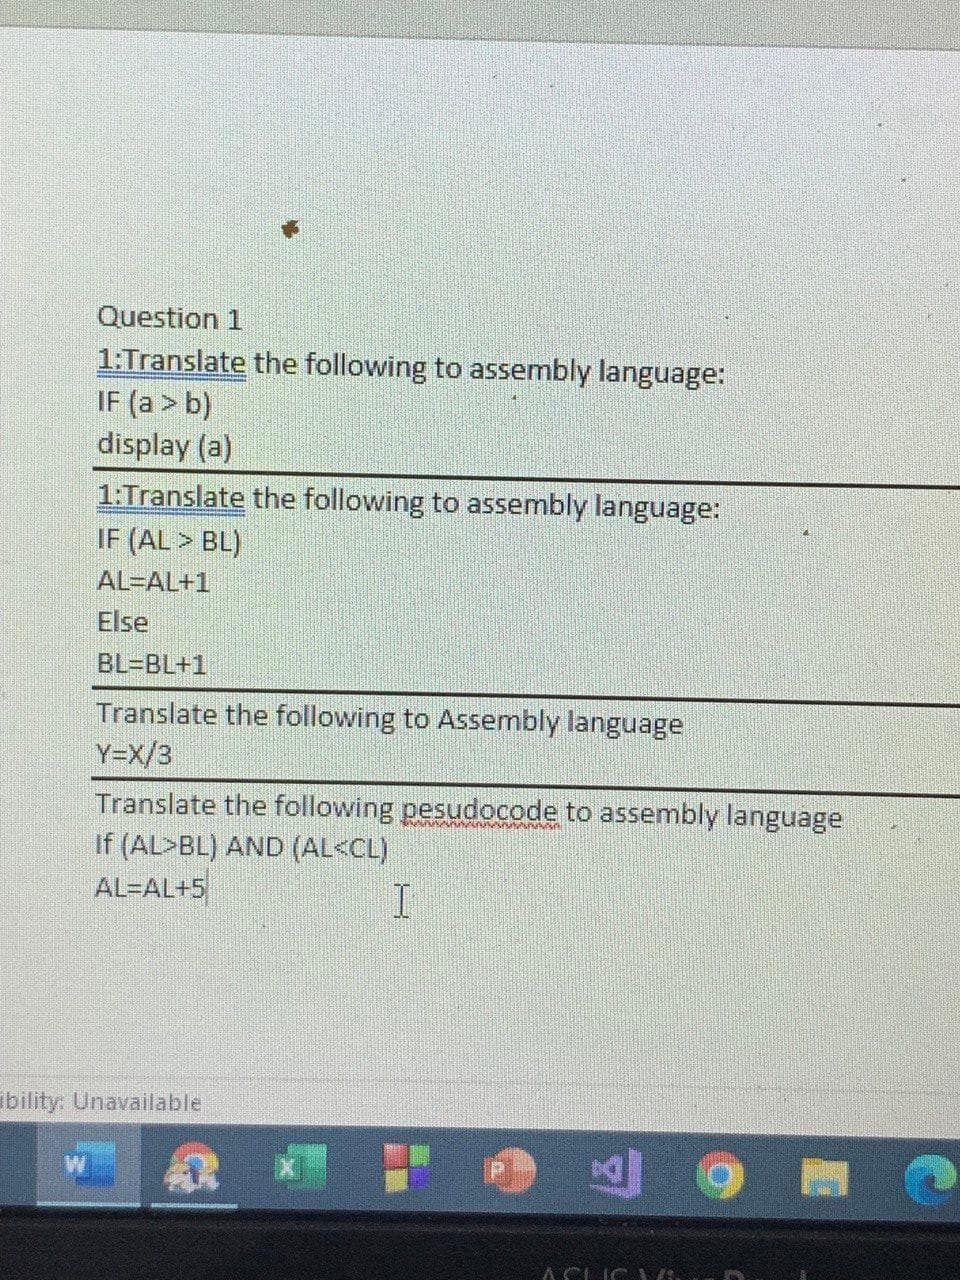 Question 1
1:Translate the following to assembly language:
IF (a > b)
display (a)
1:Translate the following to assembly language:
IF (AL > BL)
AL=AL+1
Else
BL=BL+1
Translate the following to Assembly language
Y=X/3
Translate the following pesudocode to assembly language
If (AL>BL) AND (AL<CL)
AL-AL+5
ibility: Unavailable
ACIC
